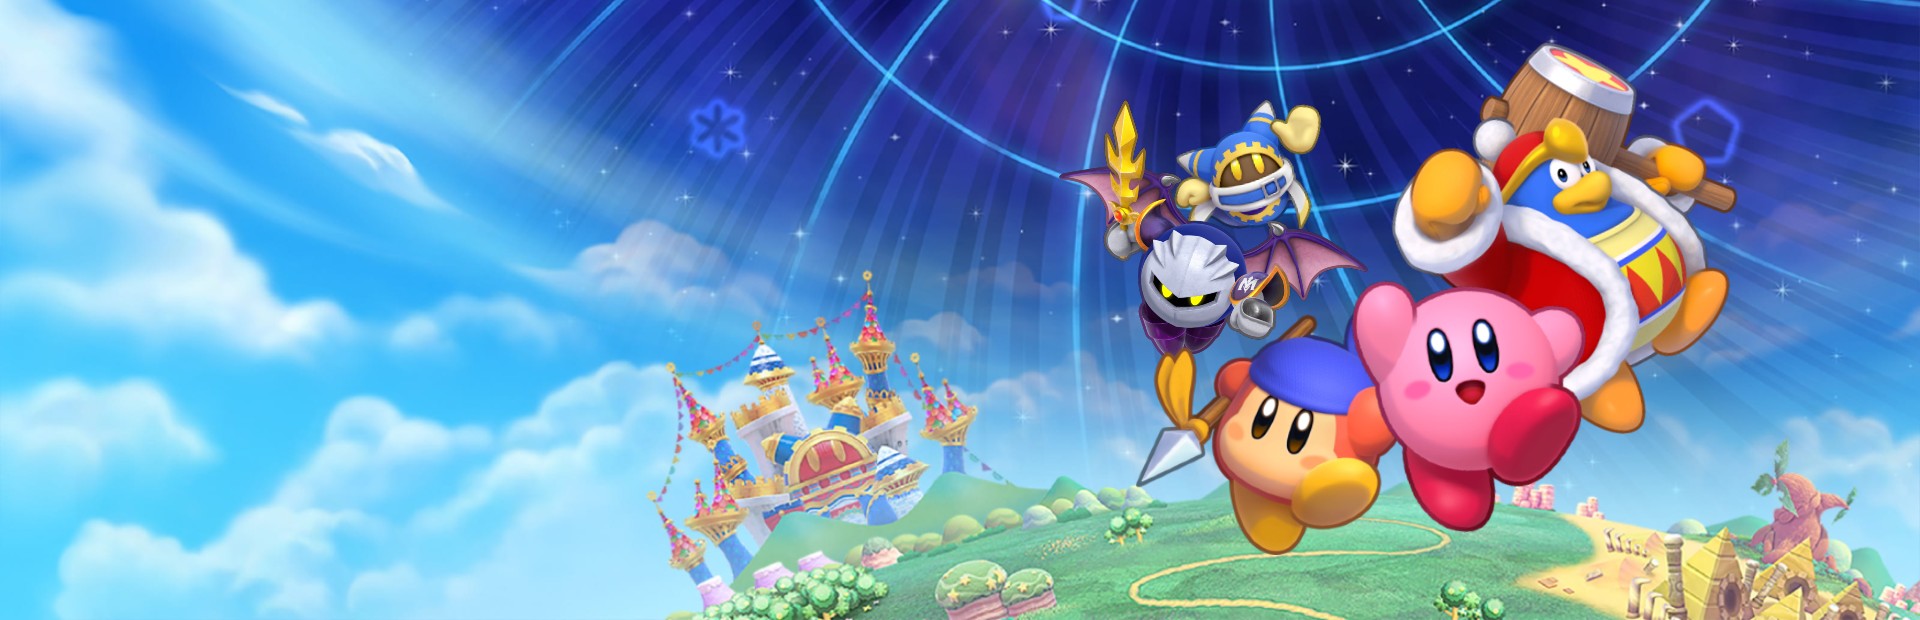 Kirby's Return to Dream Land Deluxe screenshots - Image #31814